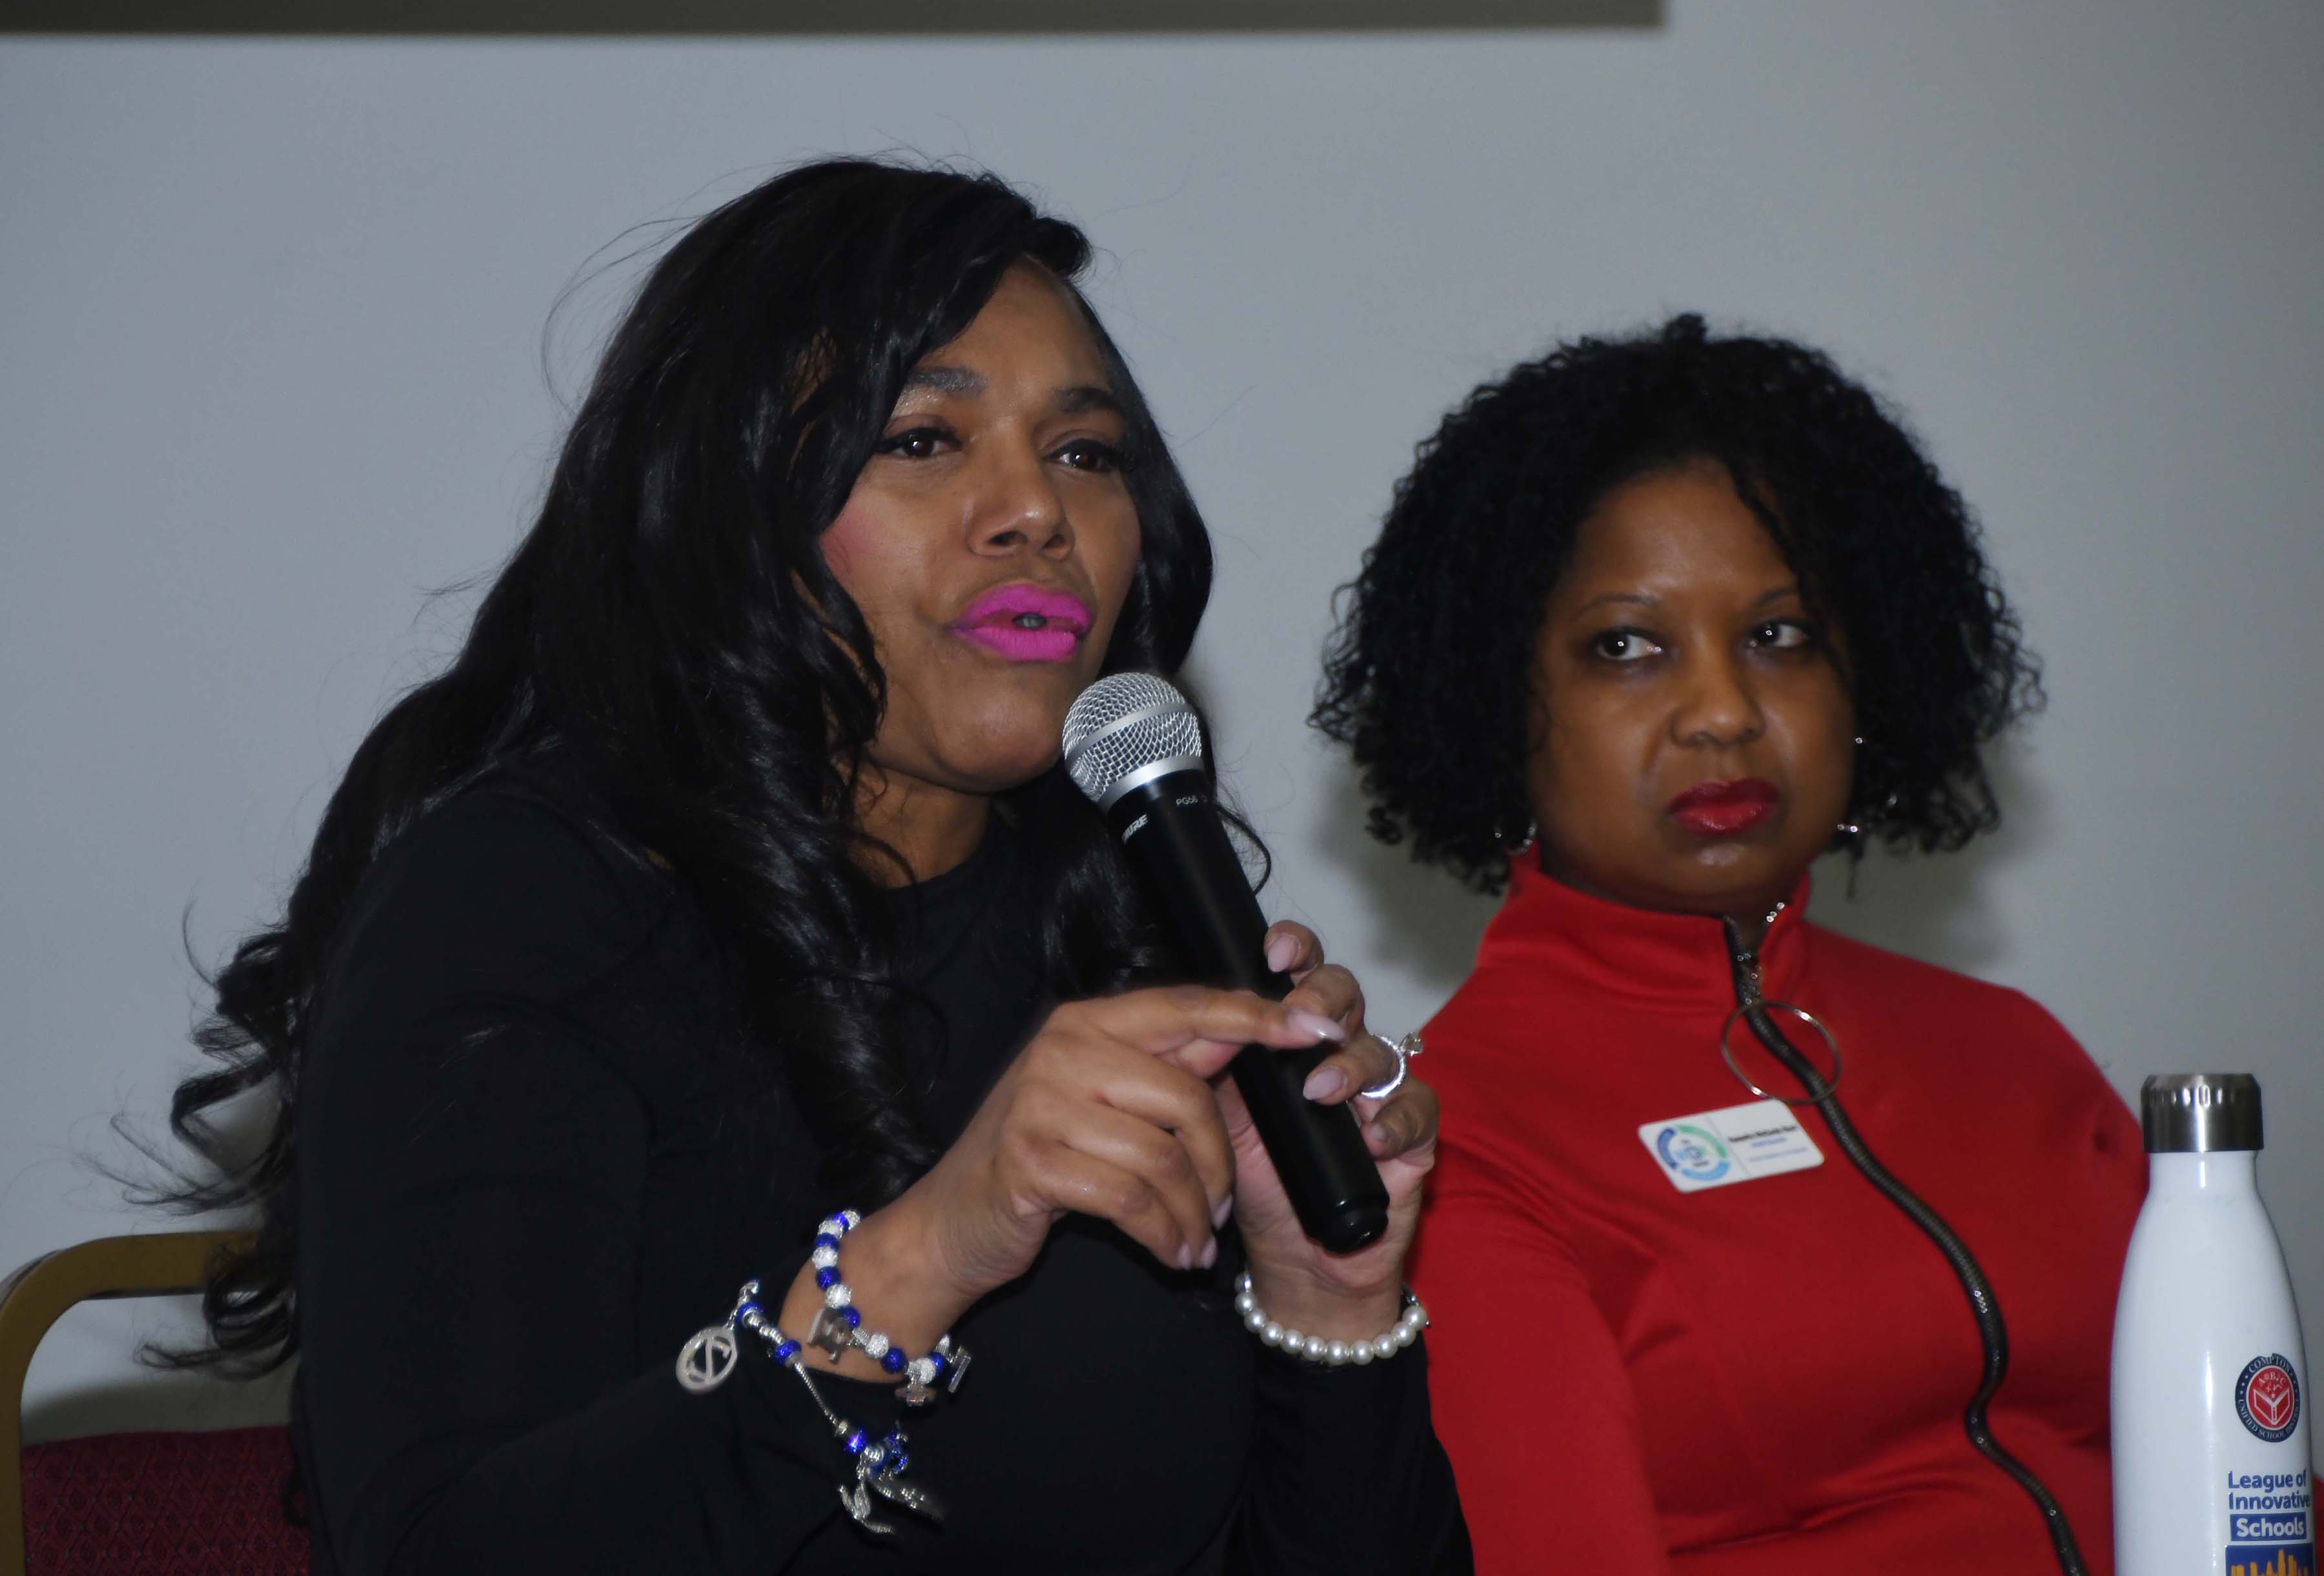 Dr. Vilicia Cade (l) and Kenyatta McCurdy-Byrd kicked off the first panel discussion during the conference.